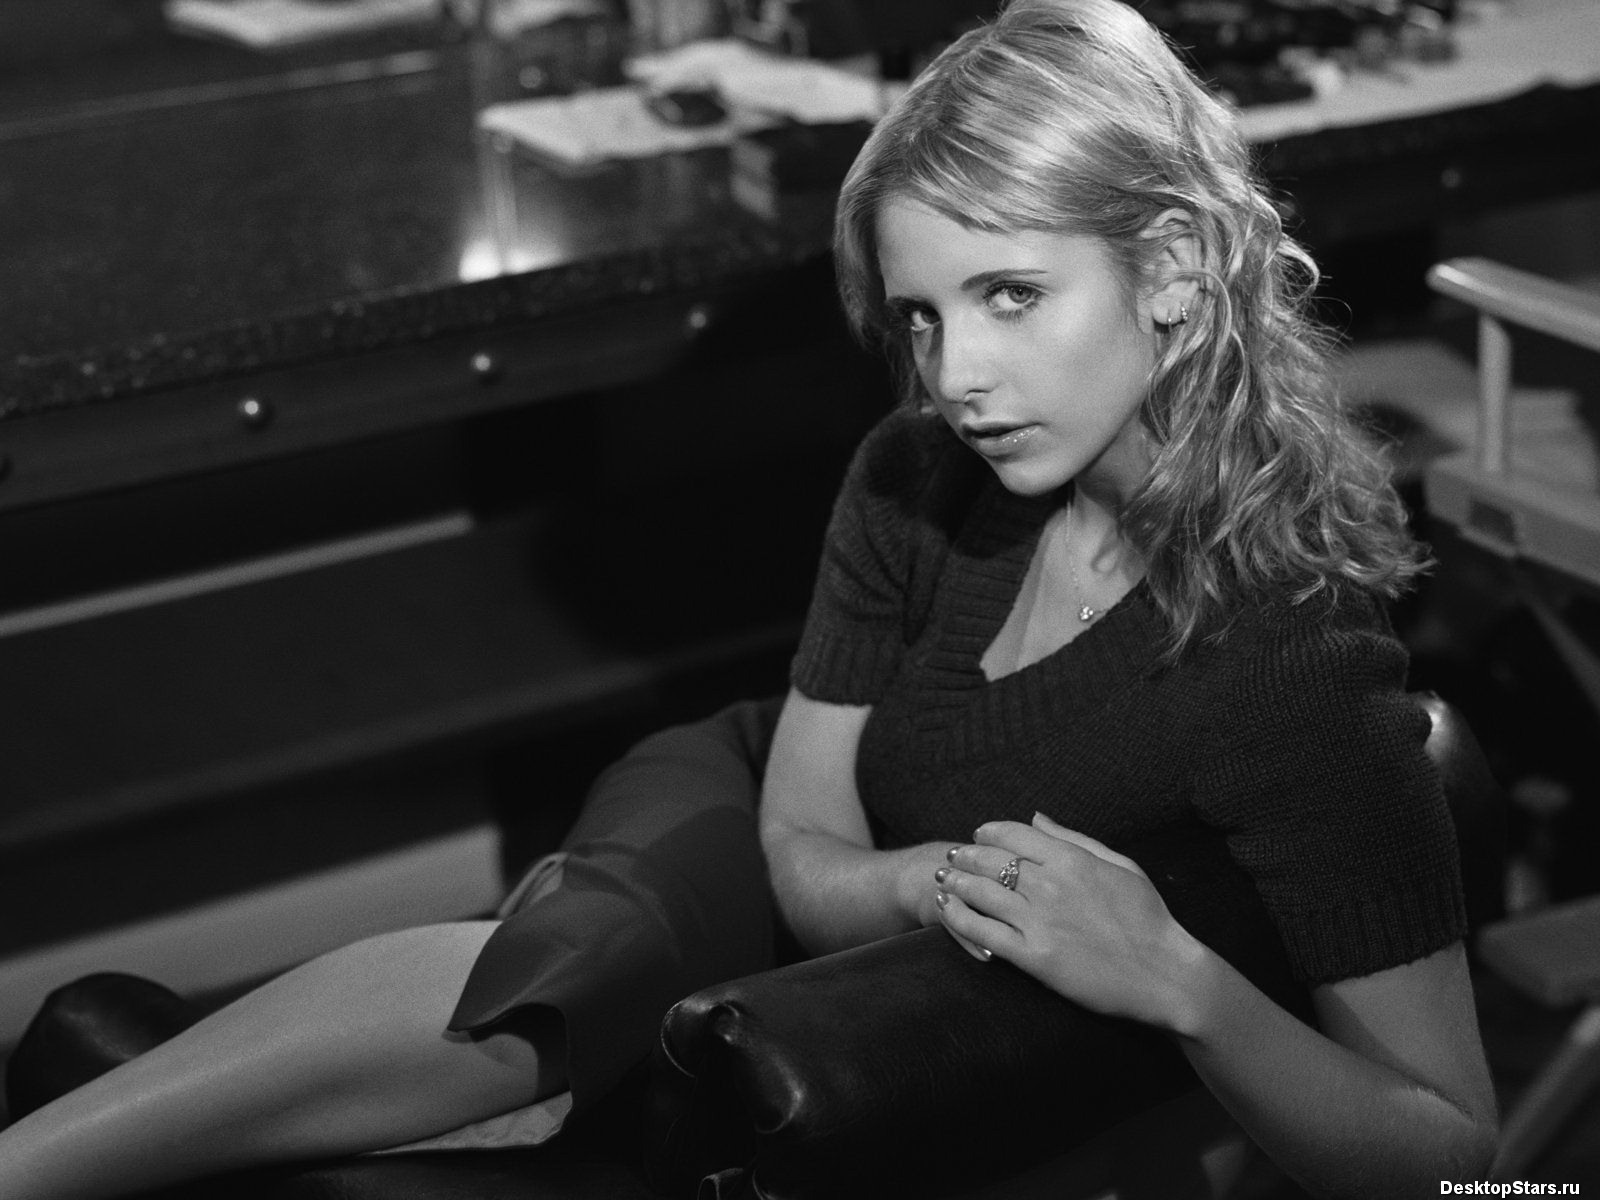 Sarah Michelle Gellar #009 - 1600x1200 Wallpapers Pictures Photos Images